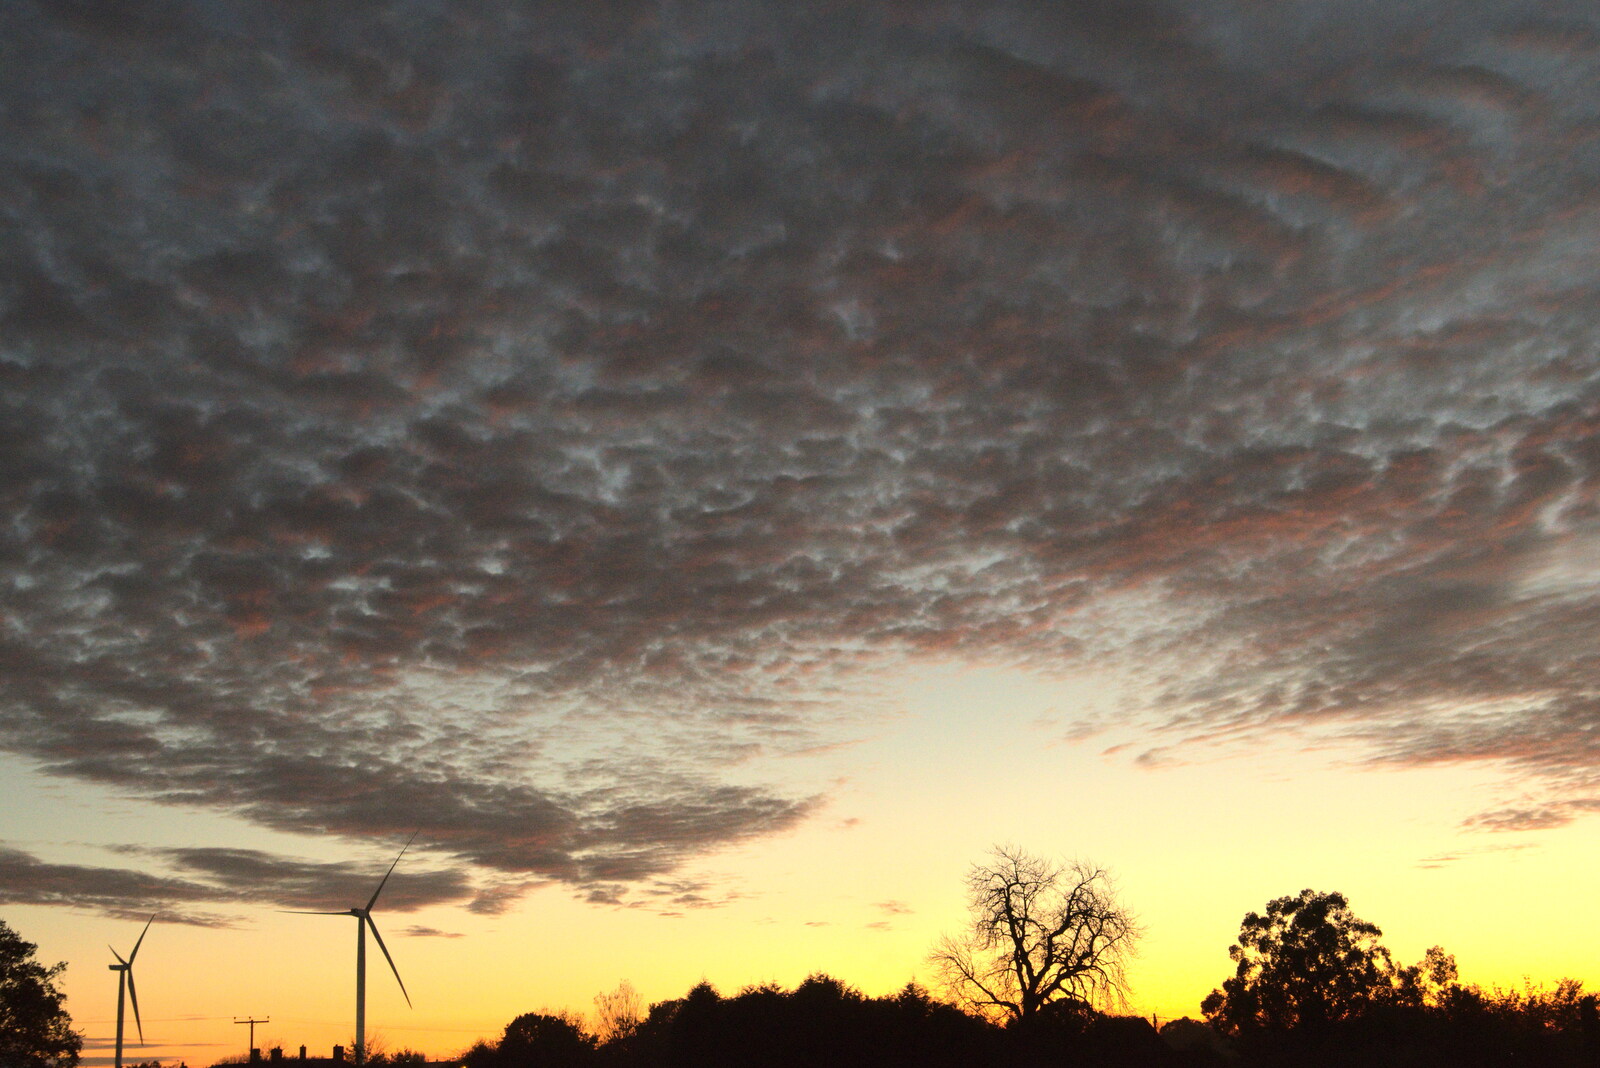 A nice sunset over the wind turbines from Pre-Lockdown in Station 119, Eye, Suffolk - 4th November 2020